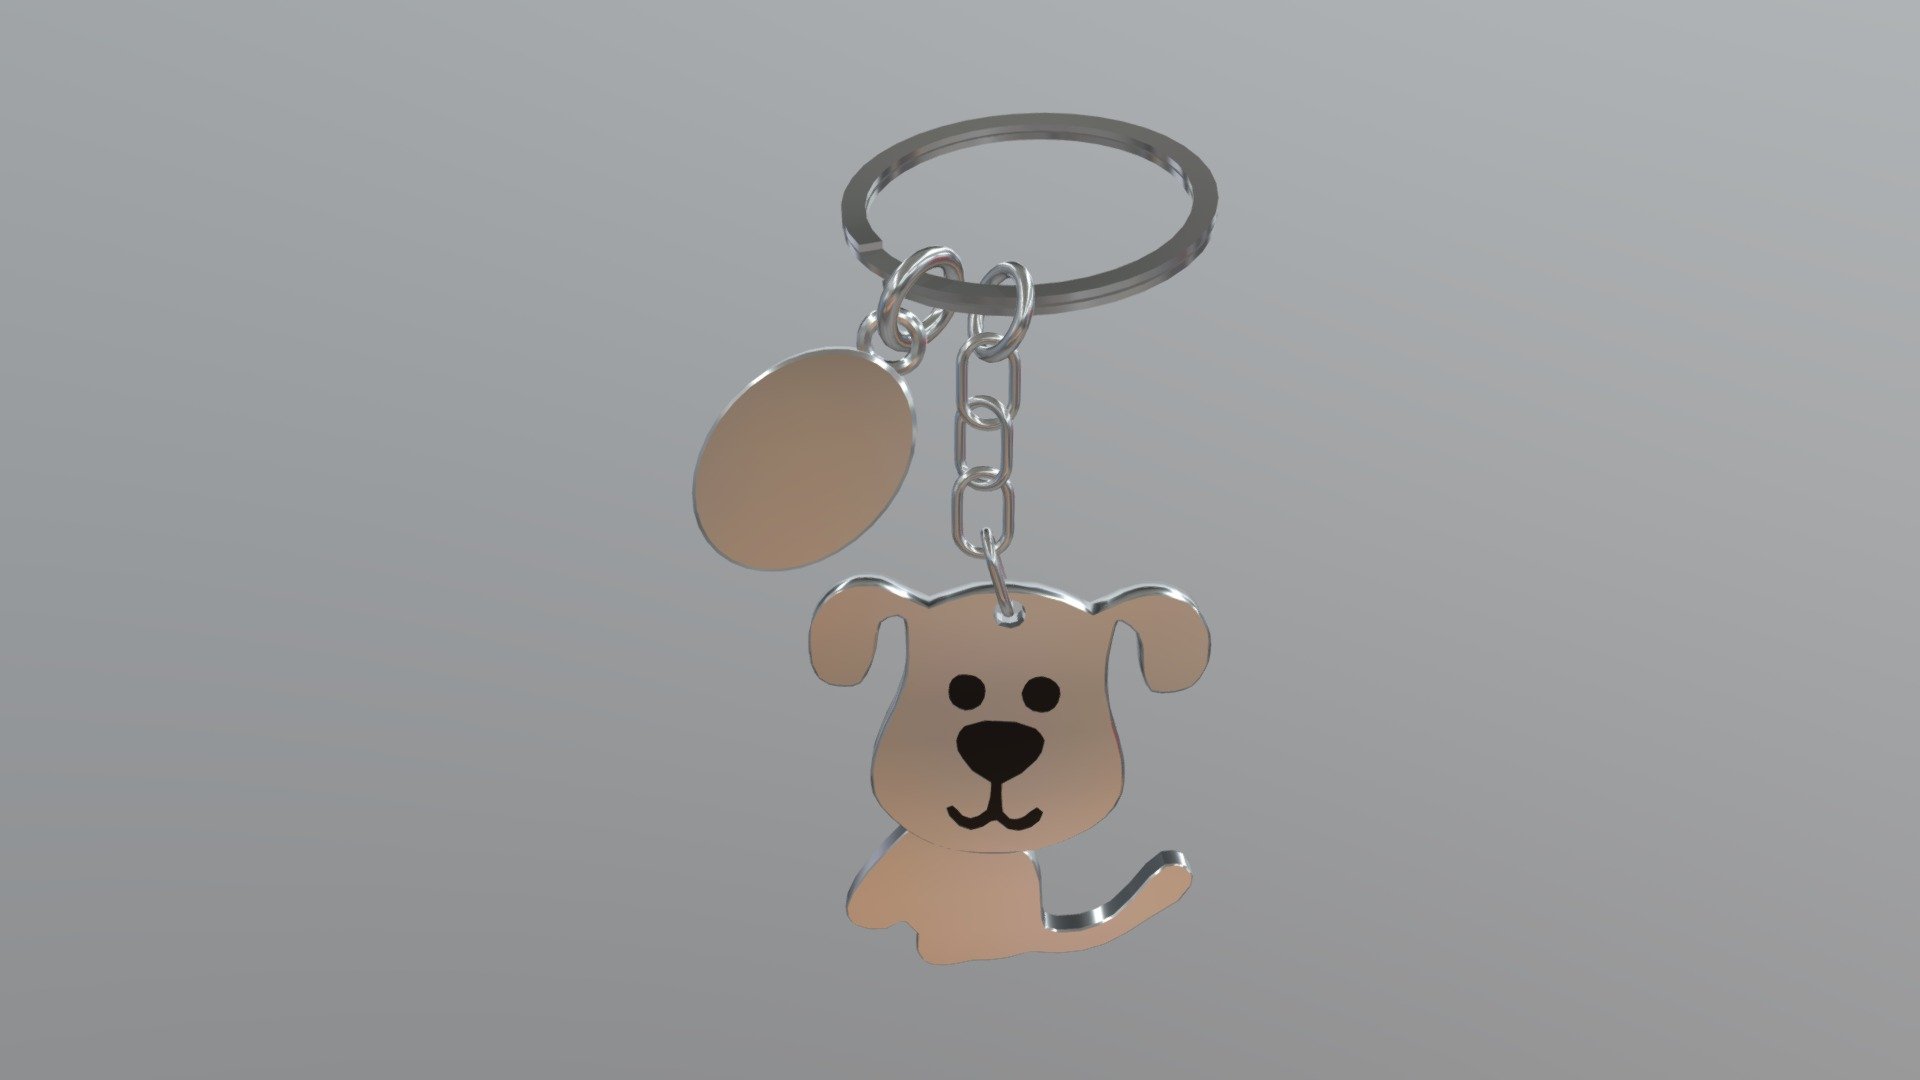 Reference picture:
https://www.aliexpress.com/item/32947588969.html

Learn 3ds max and subtance painter to create this keychain - Silver Keychain - 3D model by chyi 3d model